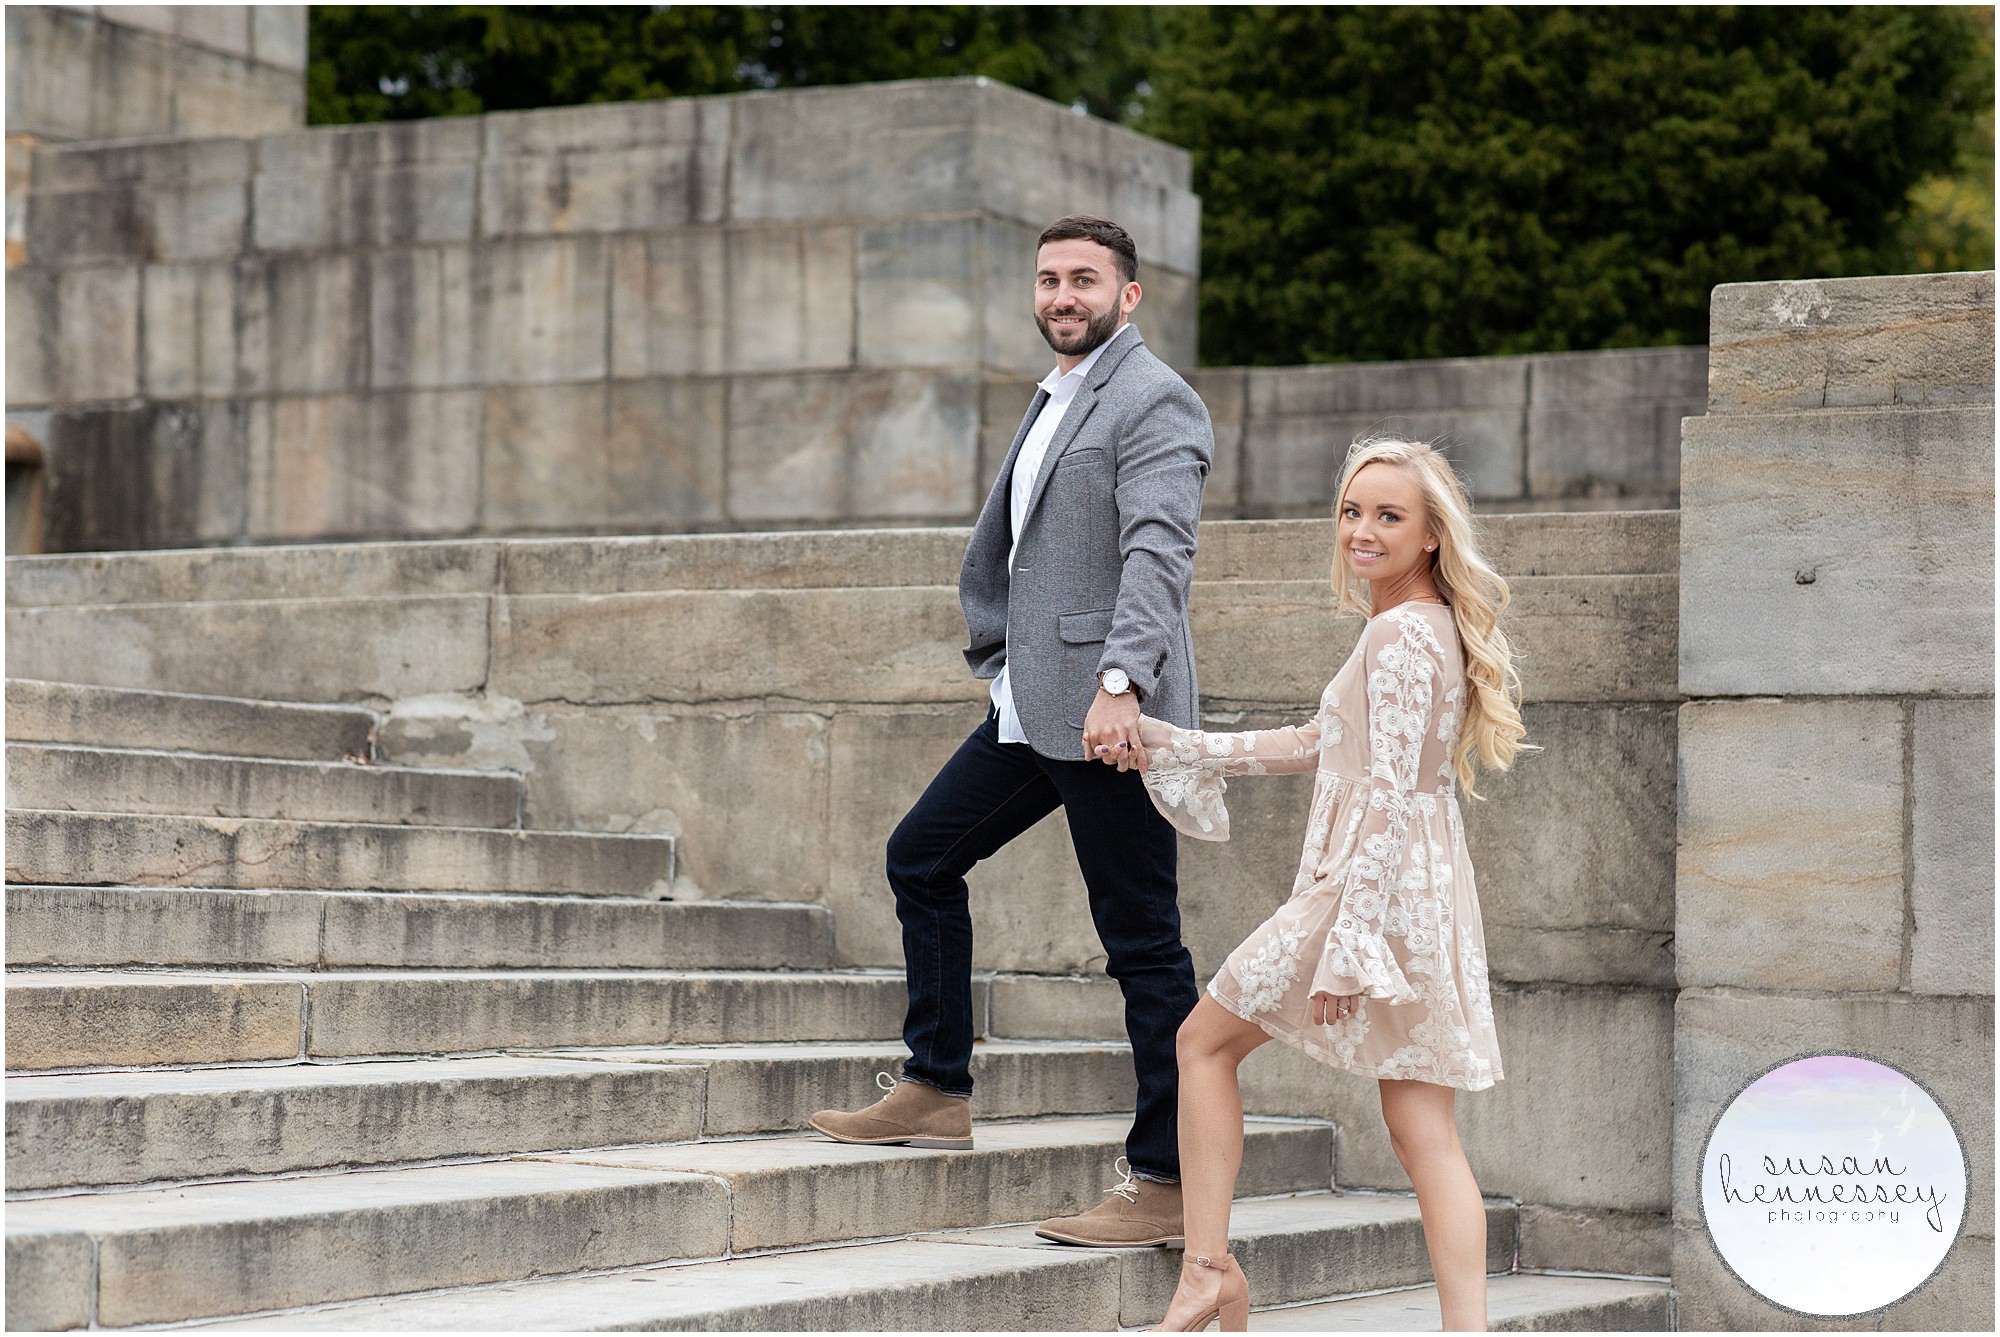 An art museum engagement session